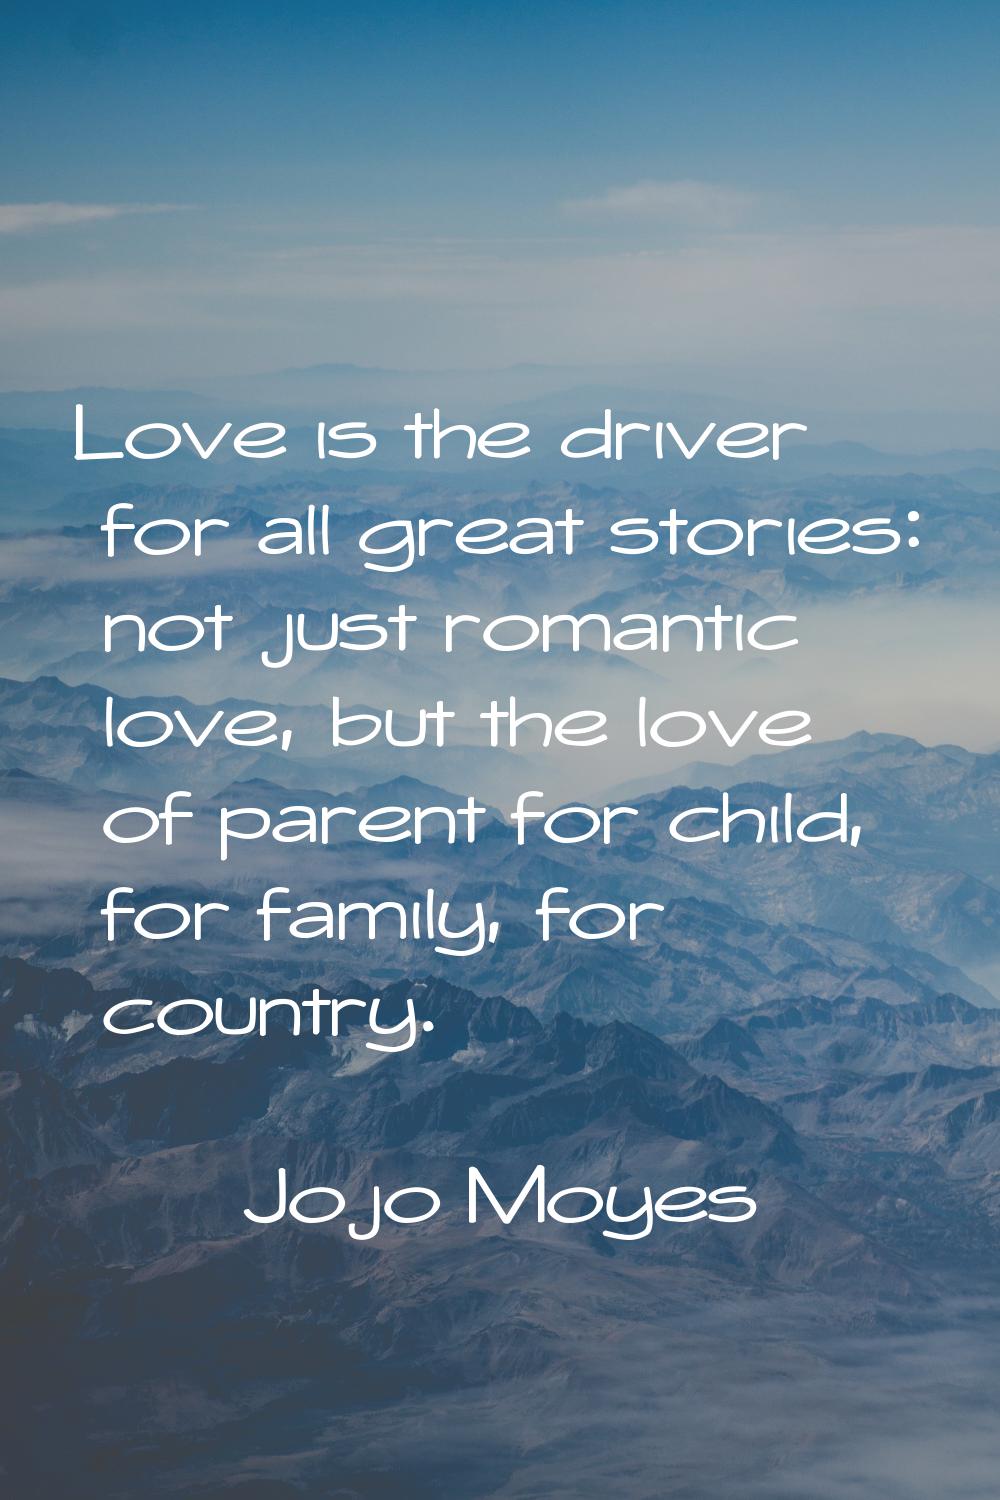 Love is the driver for all great stories: not just romantic love, but the love of parent for child,